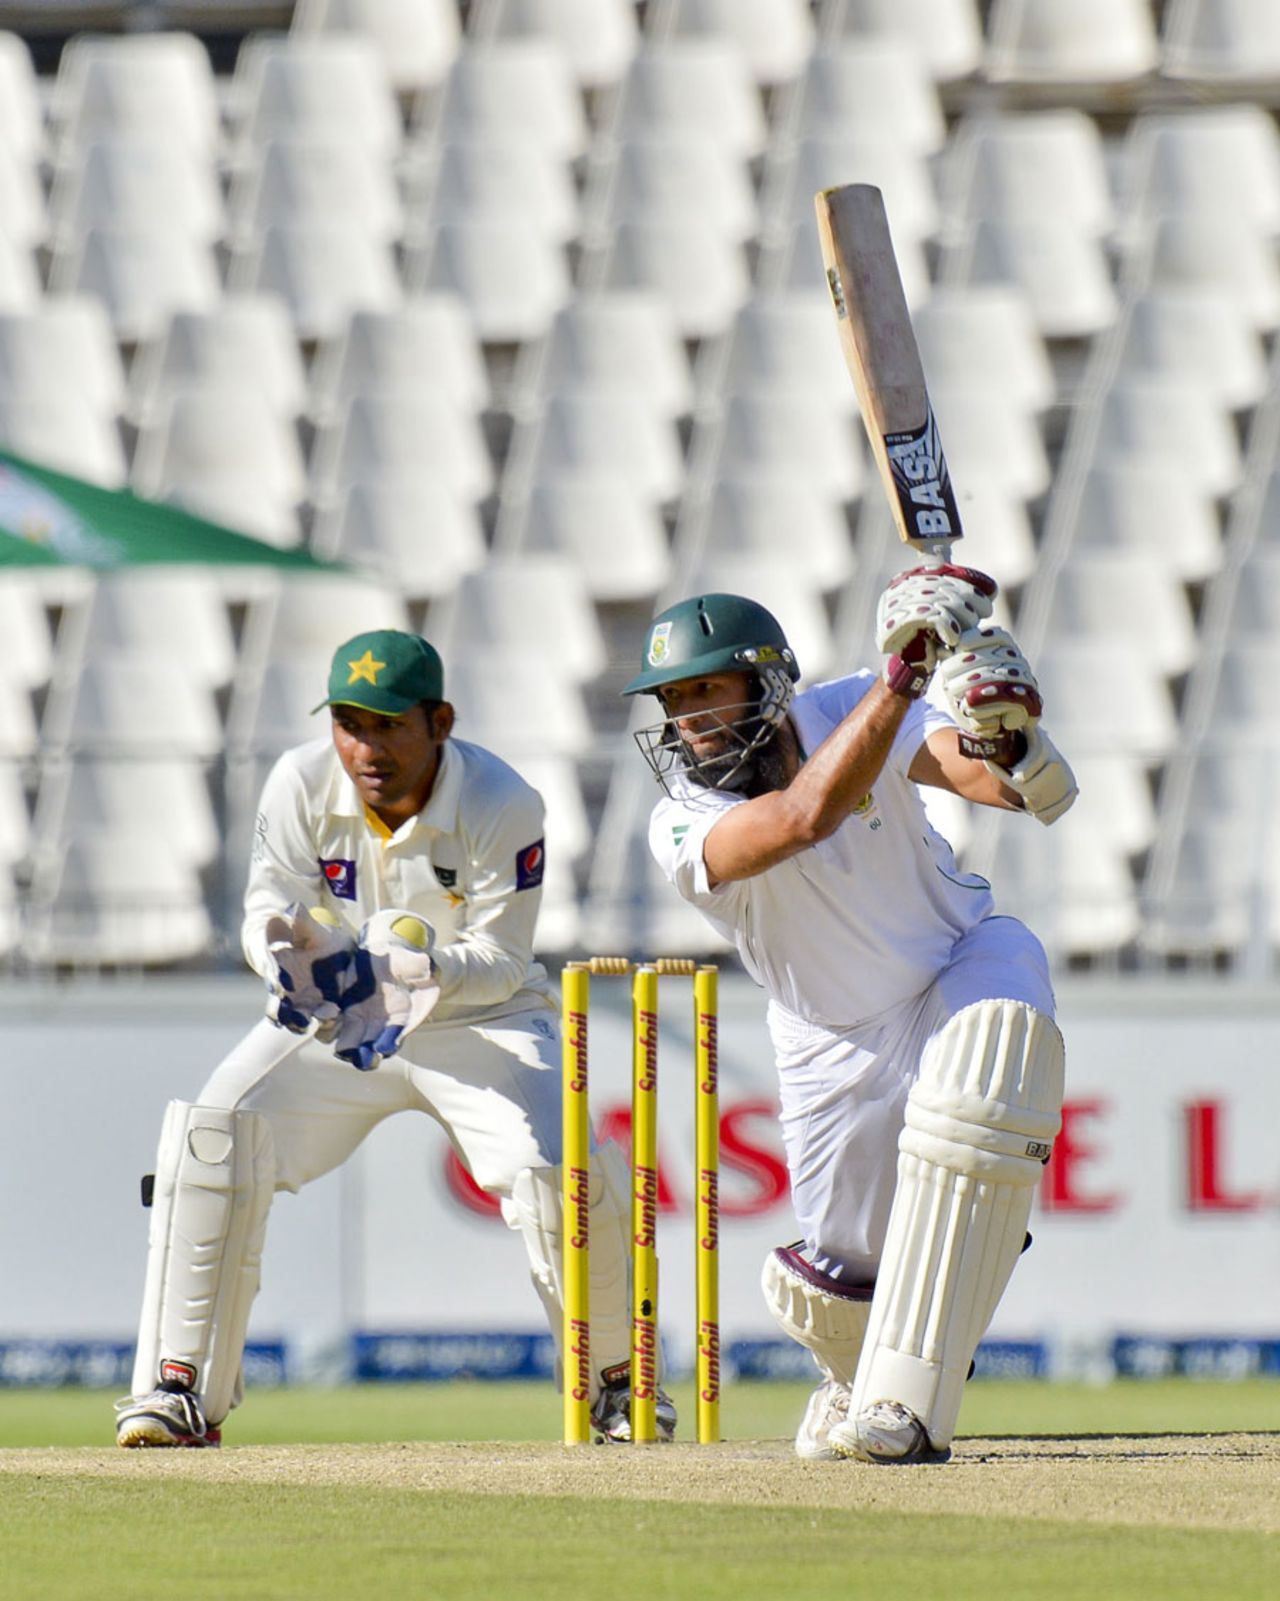 Hashim Amla drives on his way to a fifty, South Africa v Pakistan, 1st Test, Johannesburg, 2nd day, February 2, 2013